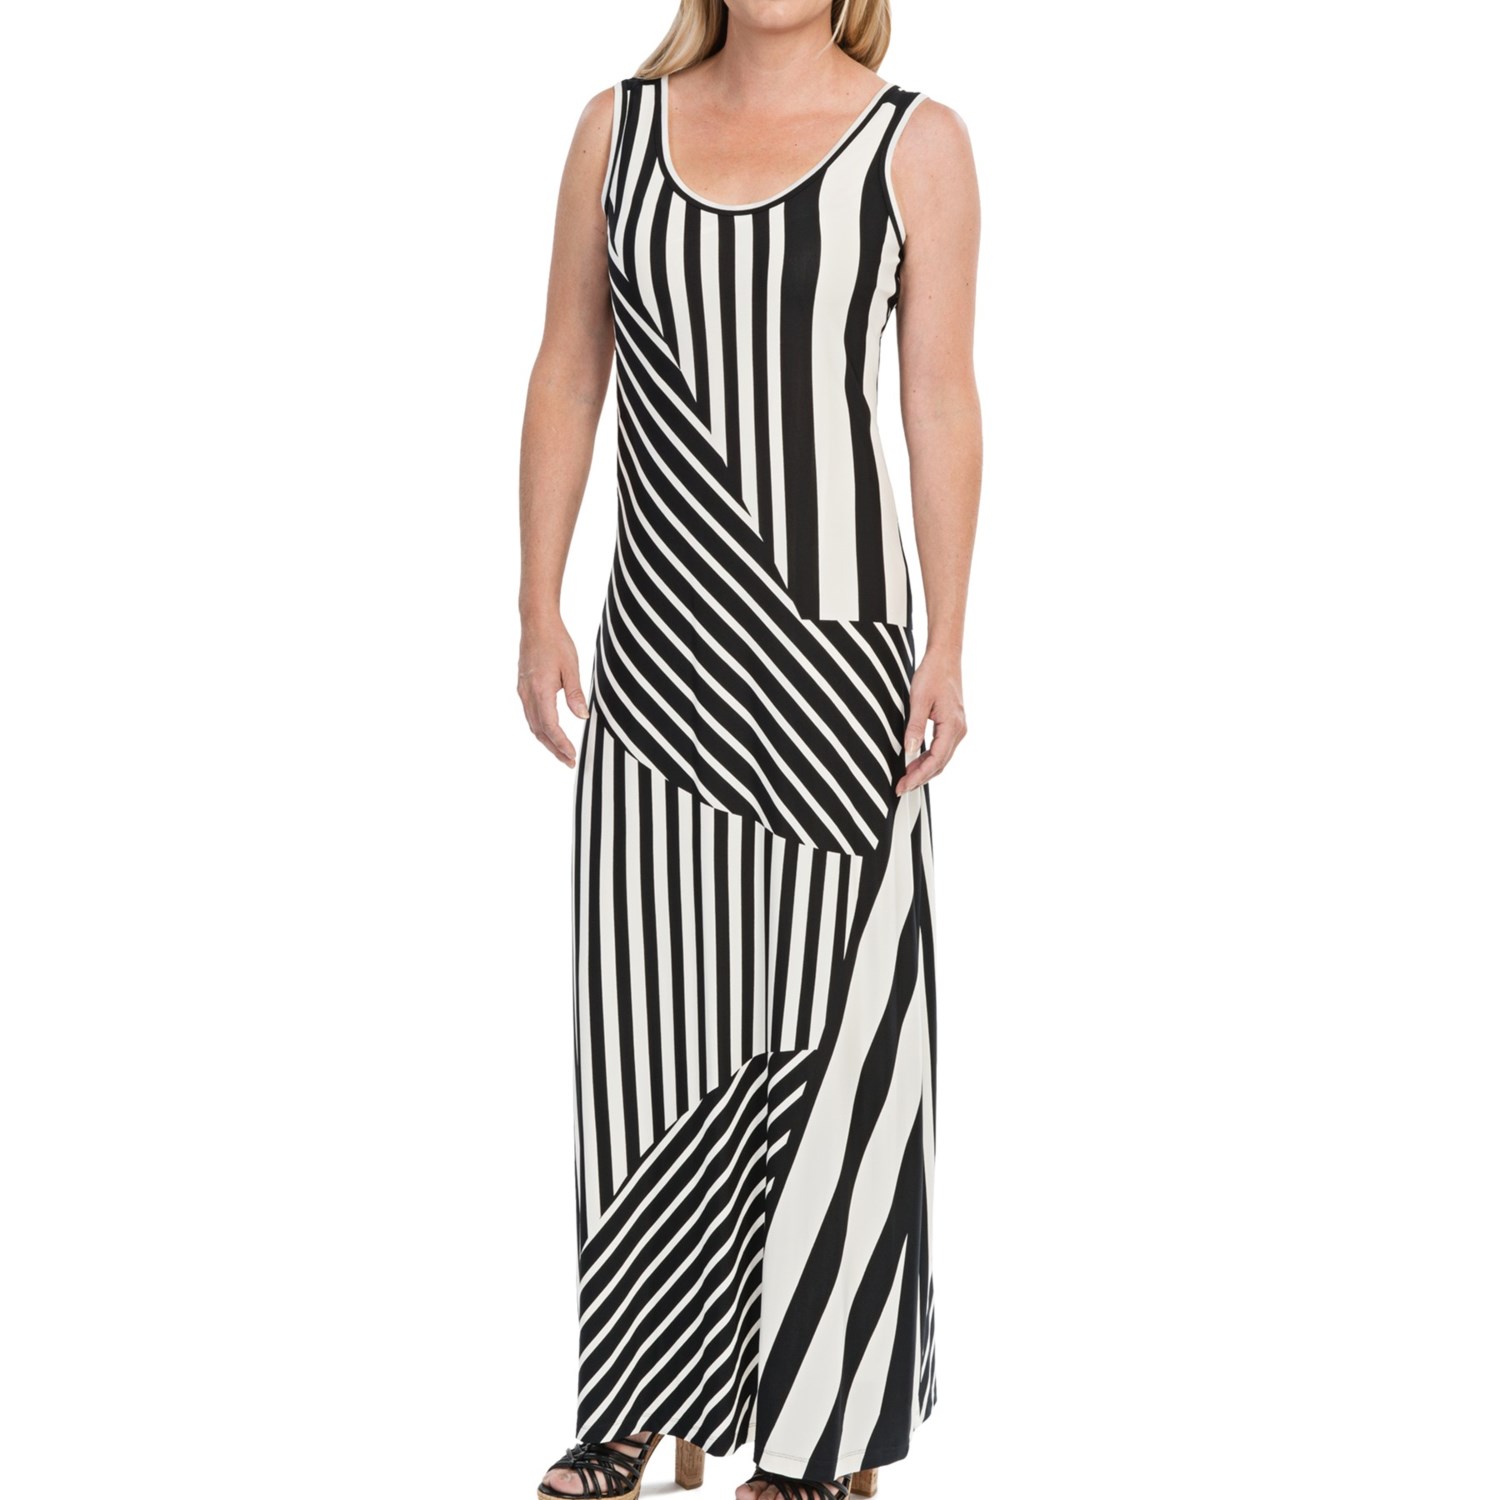 Nine West Printed Ity Knit Maxi Dress - Sleeveless (For Women) - Save 71%